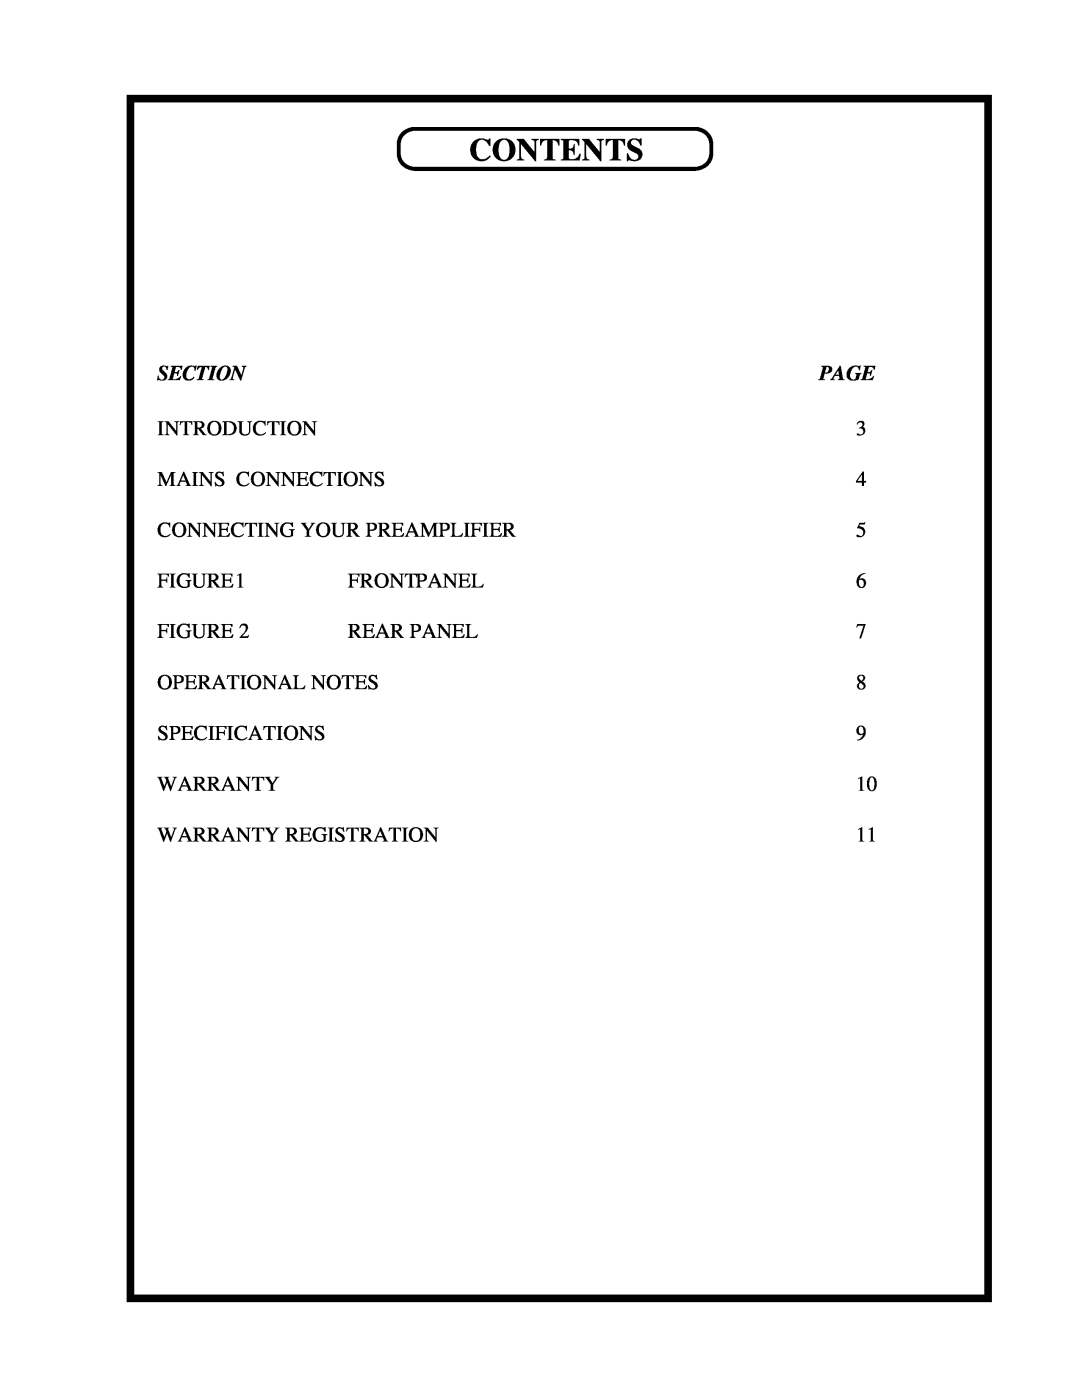 Manley Labs CONTROL MASTER PREAMPLIFIER owner manual Contents, Section, Page 